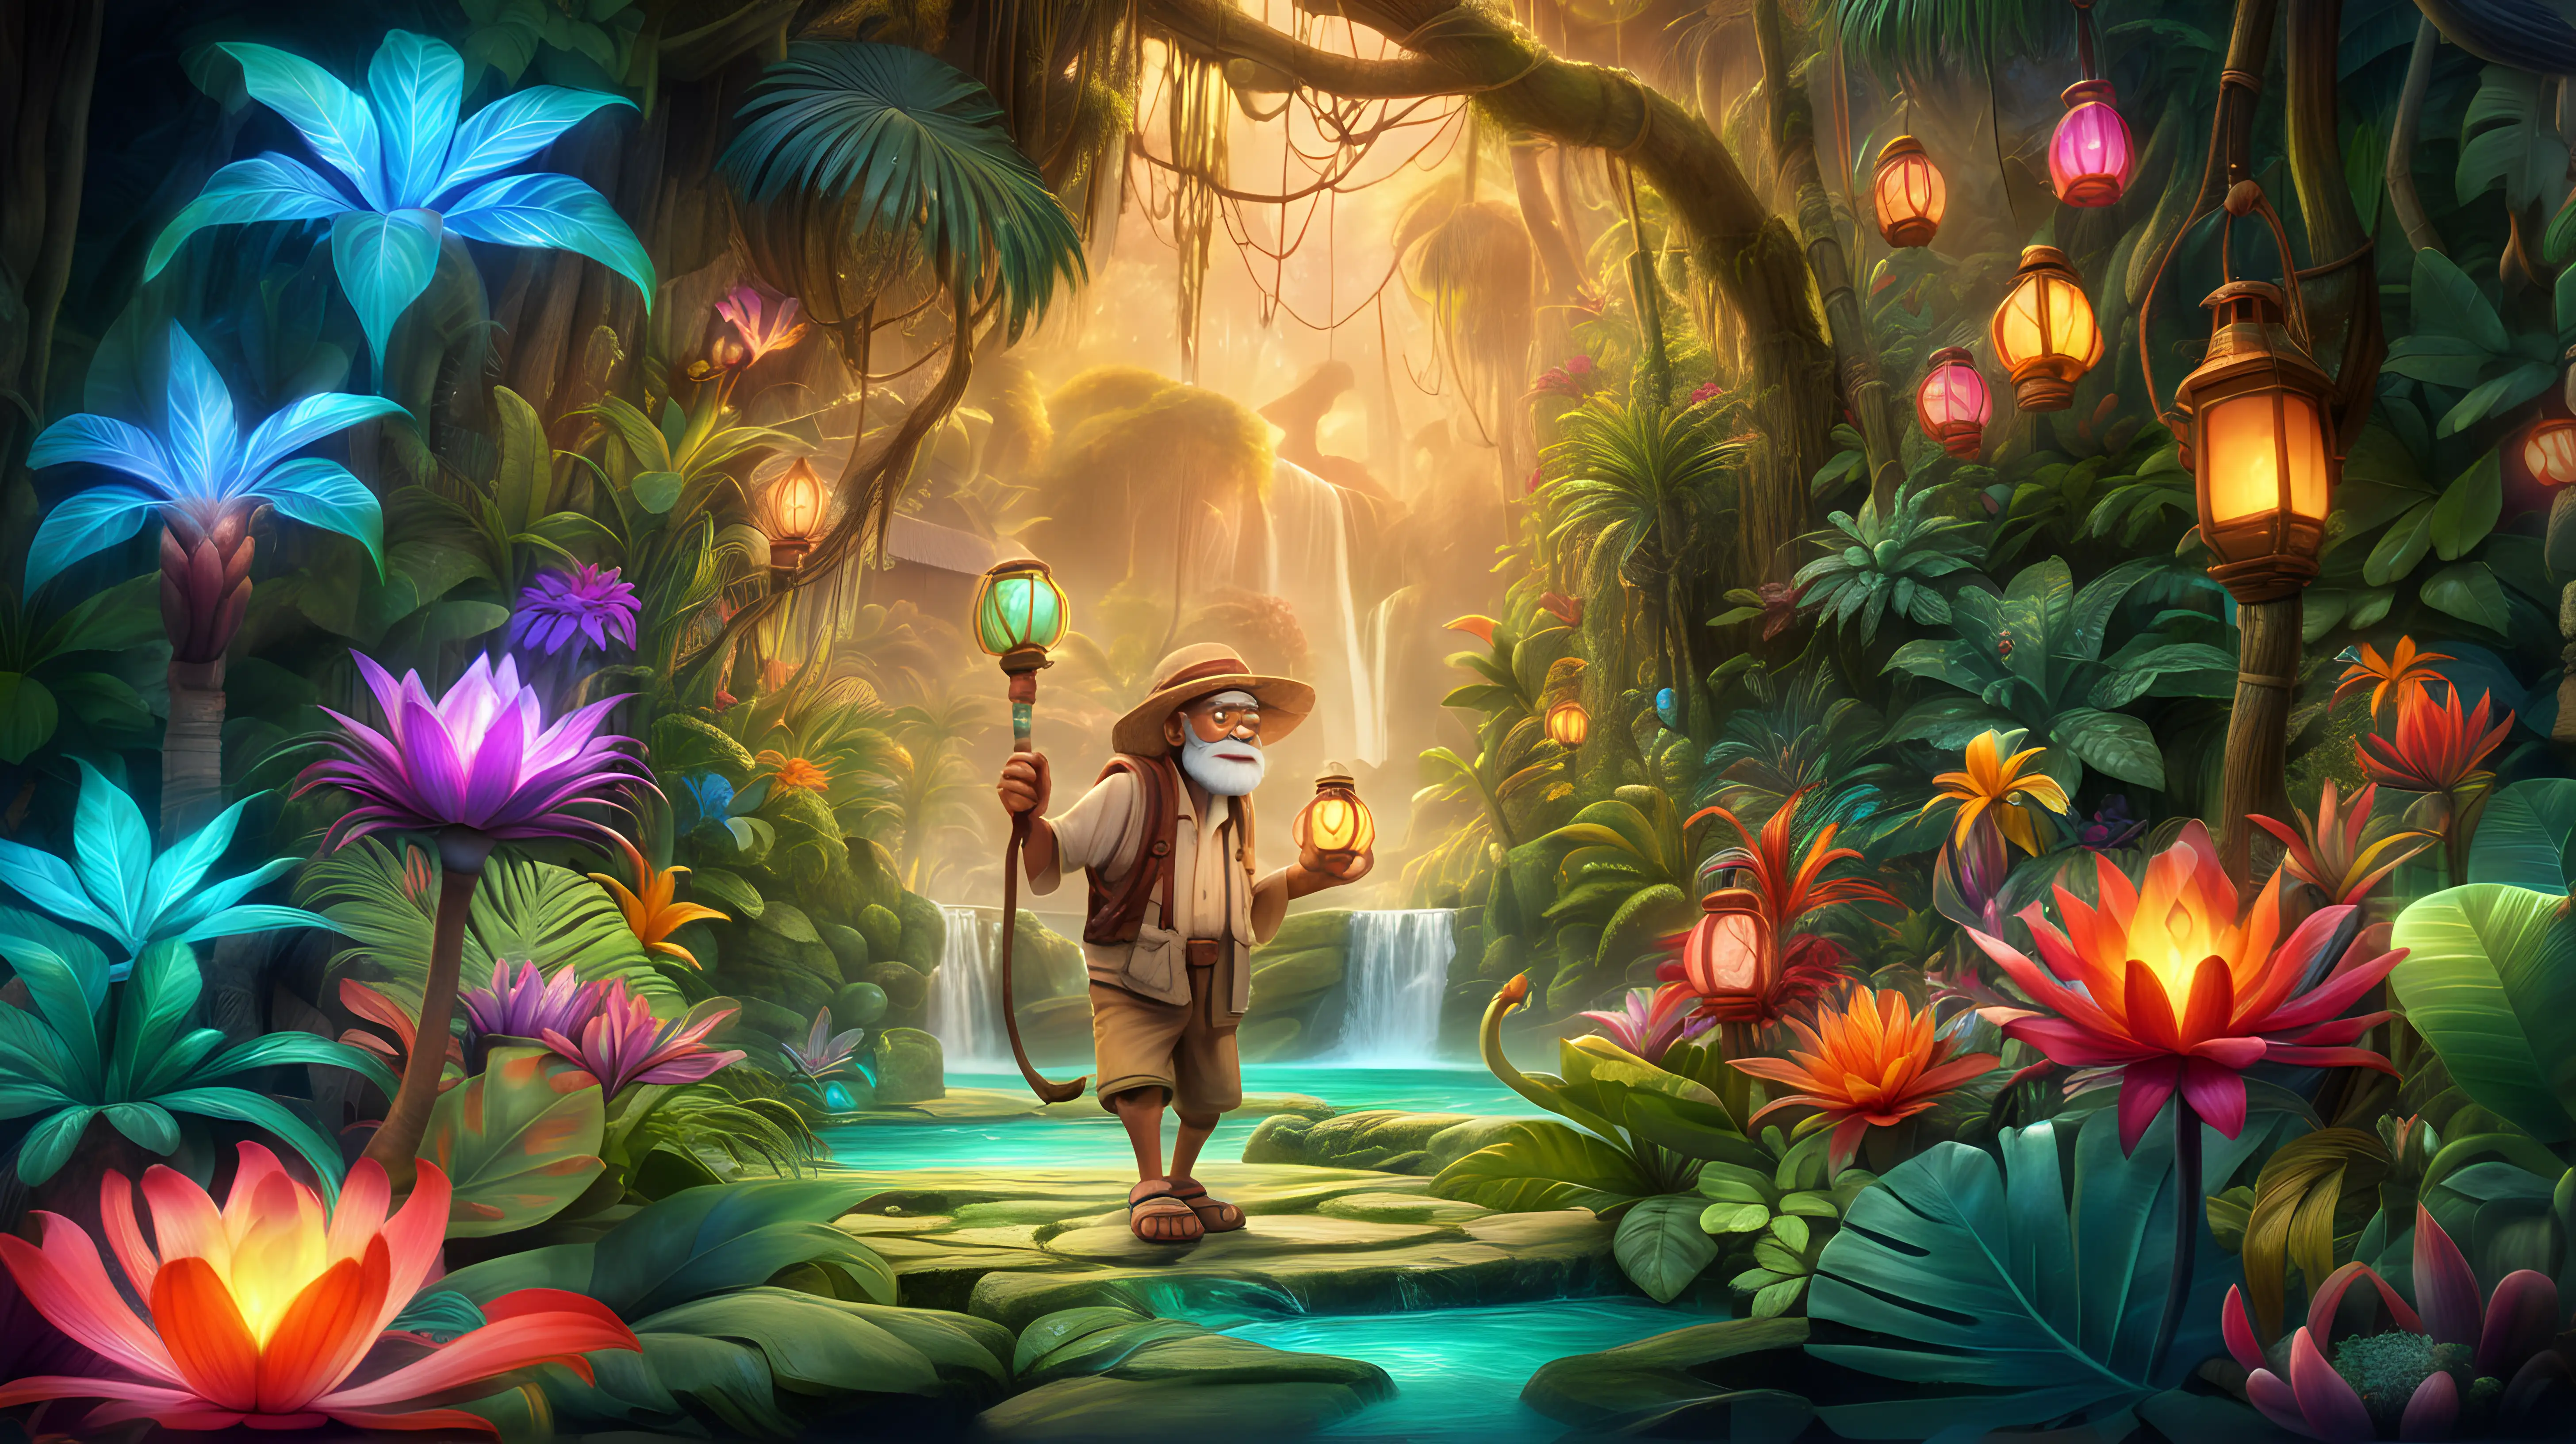 Envision an elderly animated character, his lantern revealing the vibrant colors of exotic, glowing flowers and surreal plant life, creating an otherworldly atmosphere in the heart of the jungle.